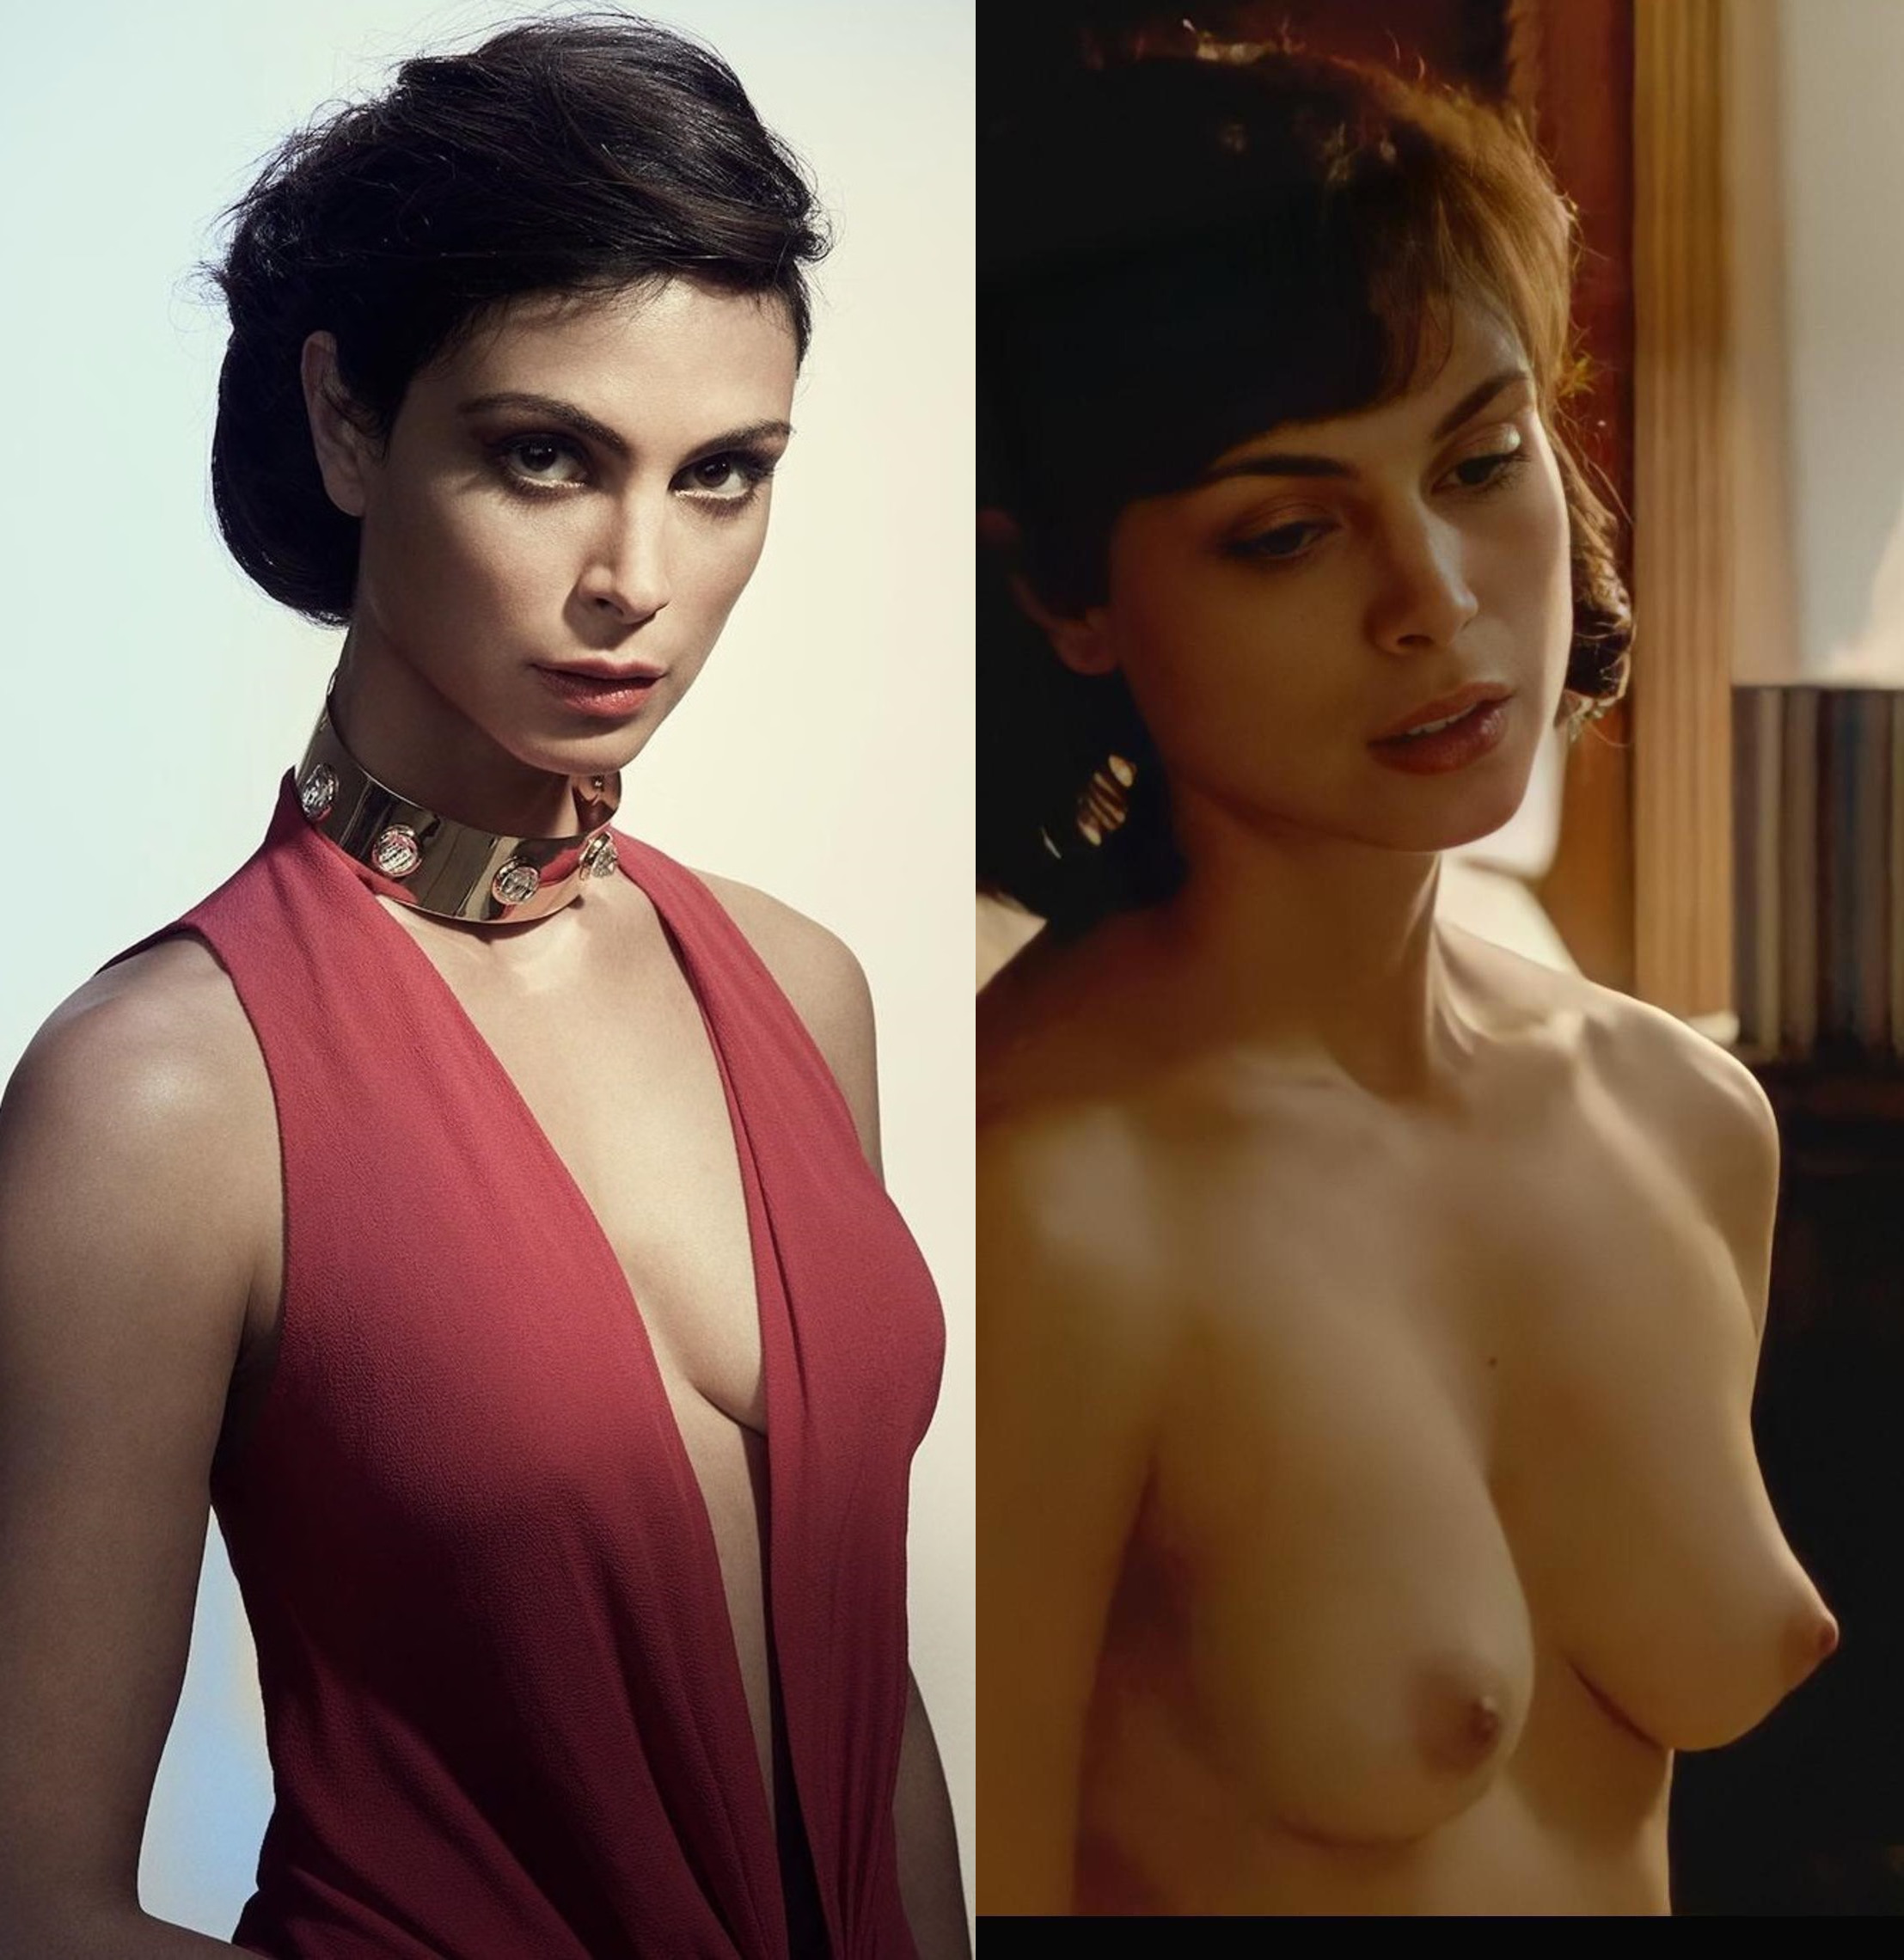 Morena Baccarin On/Off.